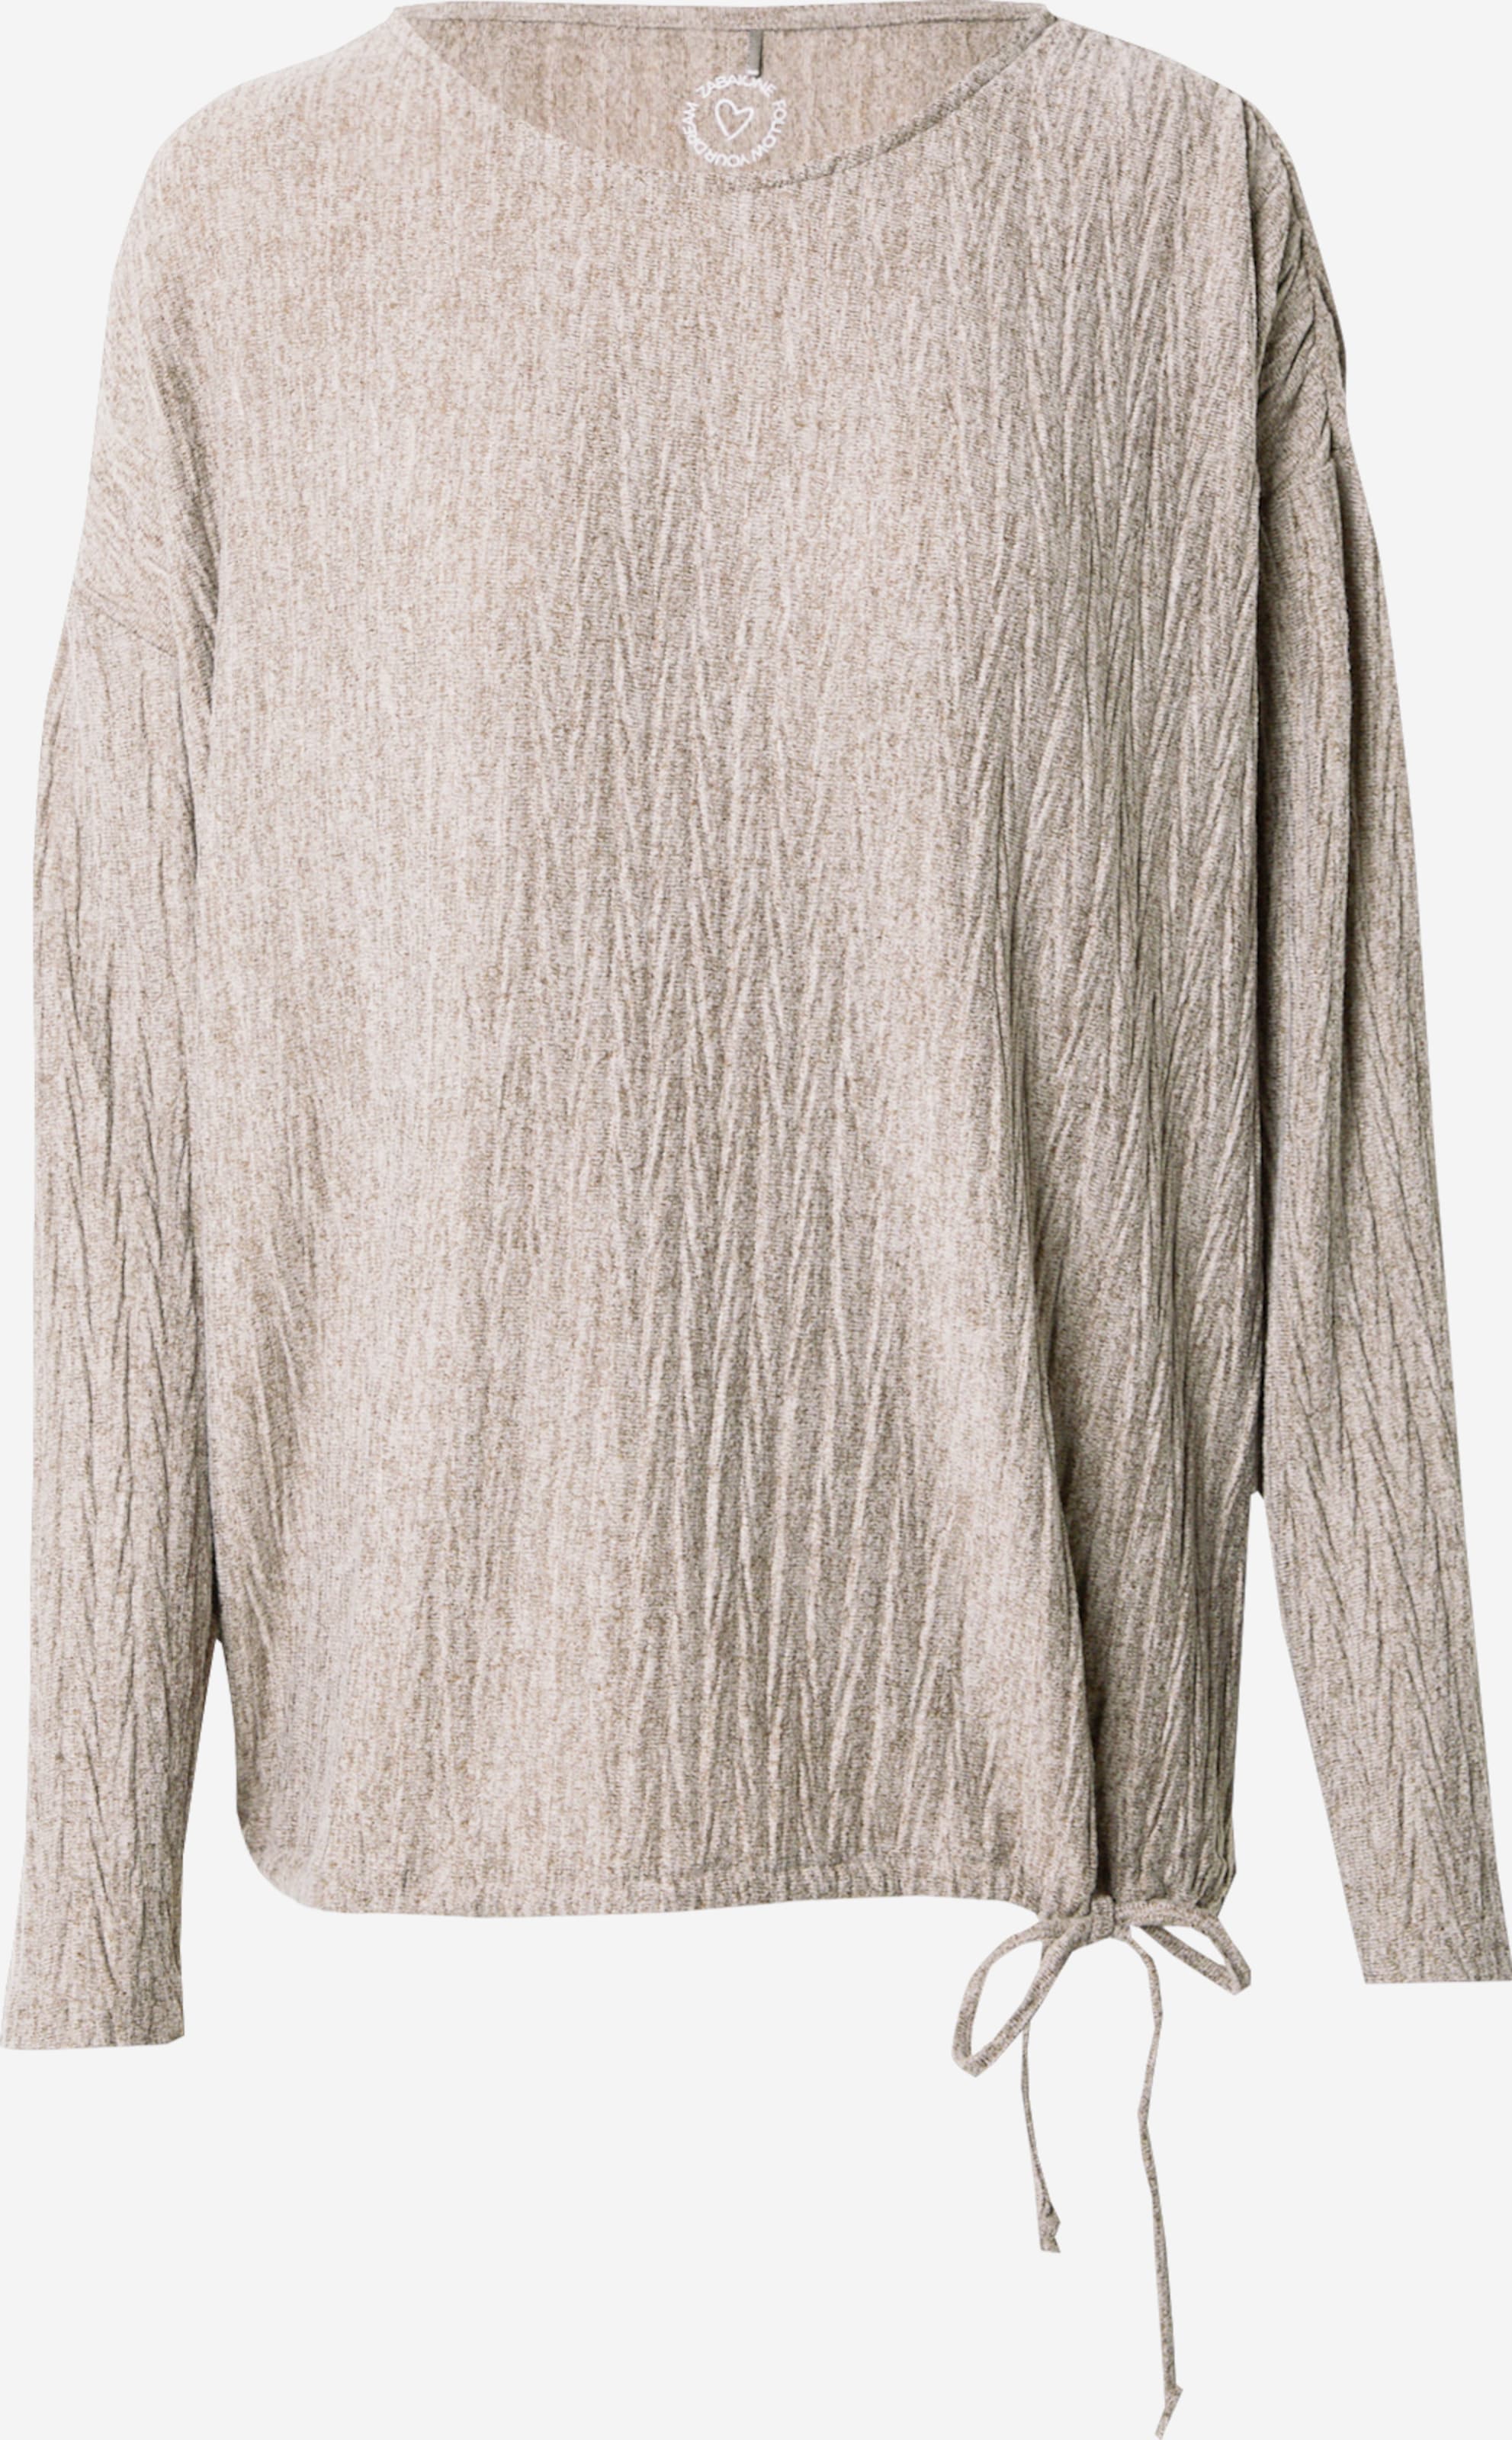 ZABAIONE Shirt | \'Sa44nj\' YOU ABOUT Taupe in